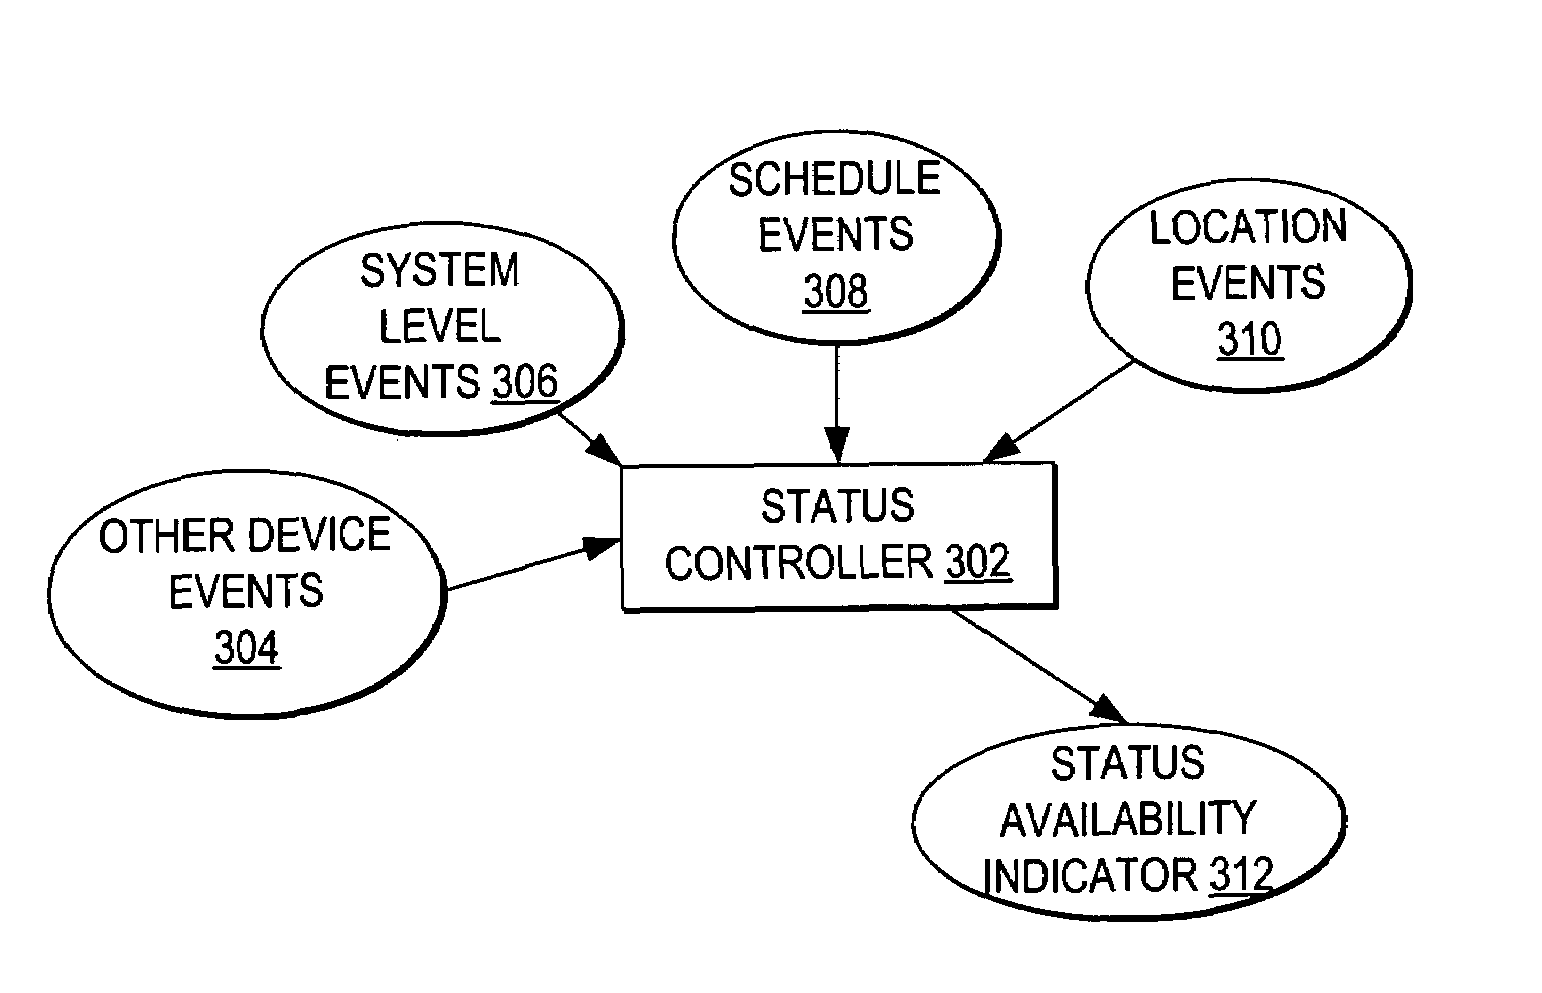 Automatically infering and updating an availability status of a user